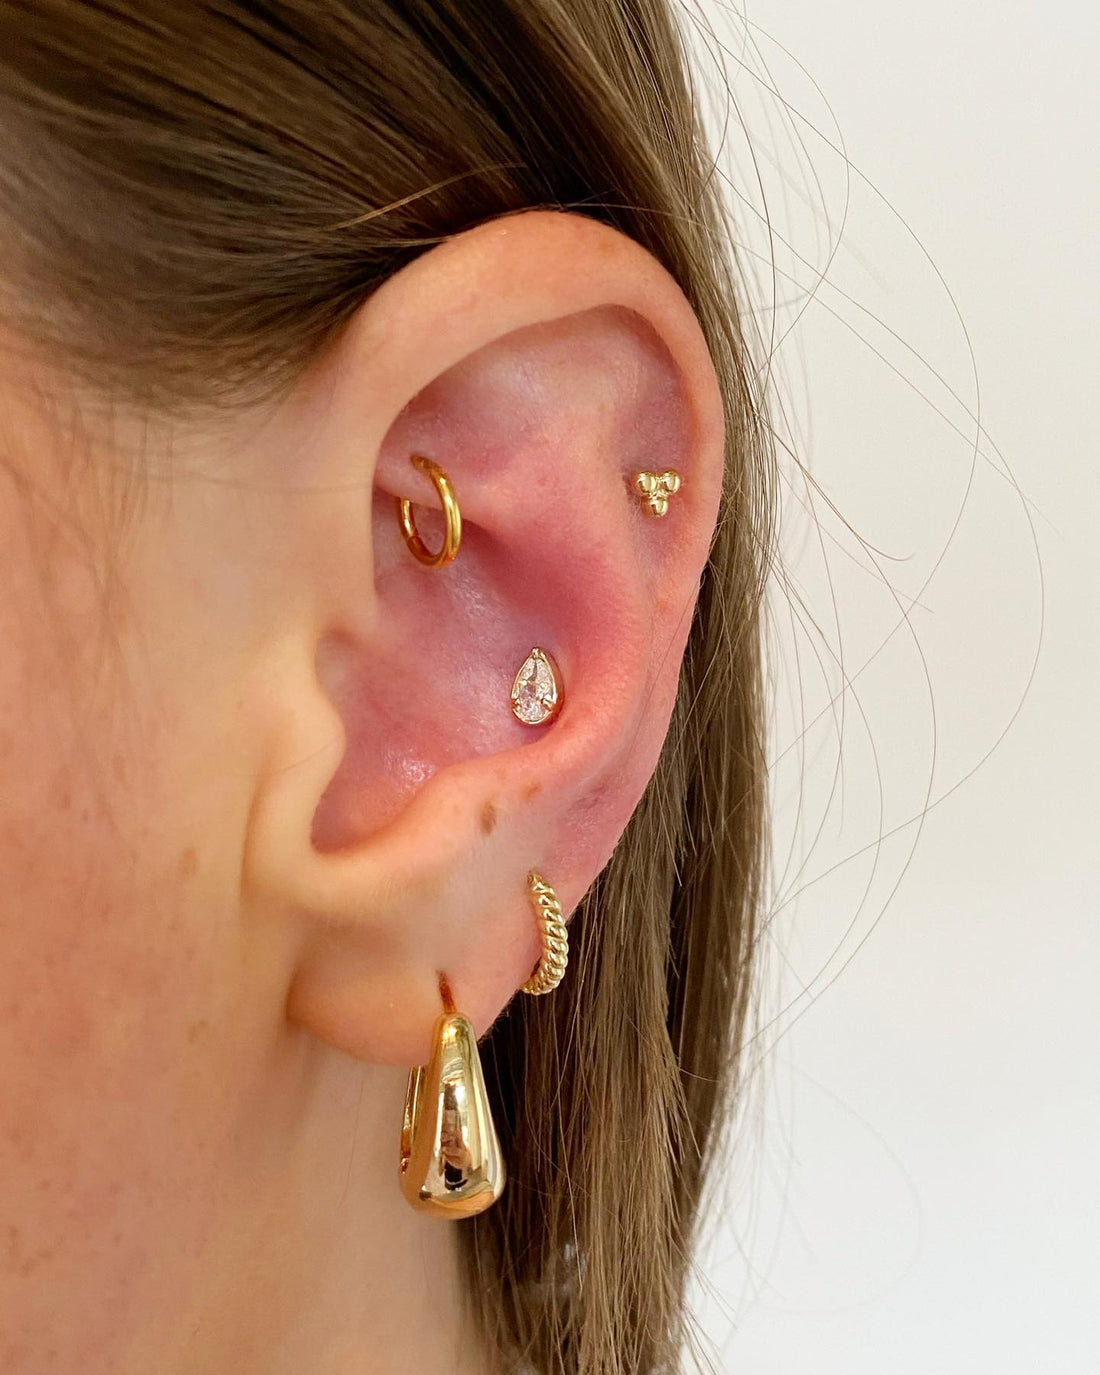 How does anatomy affect a piercing?